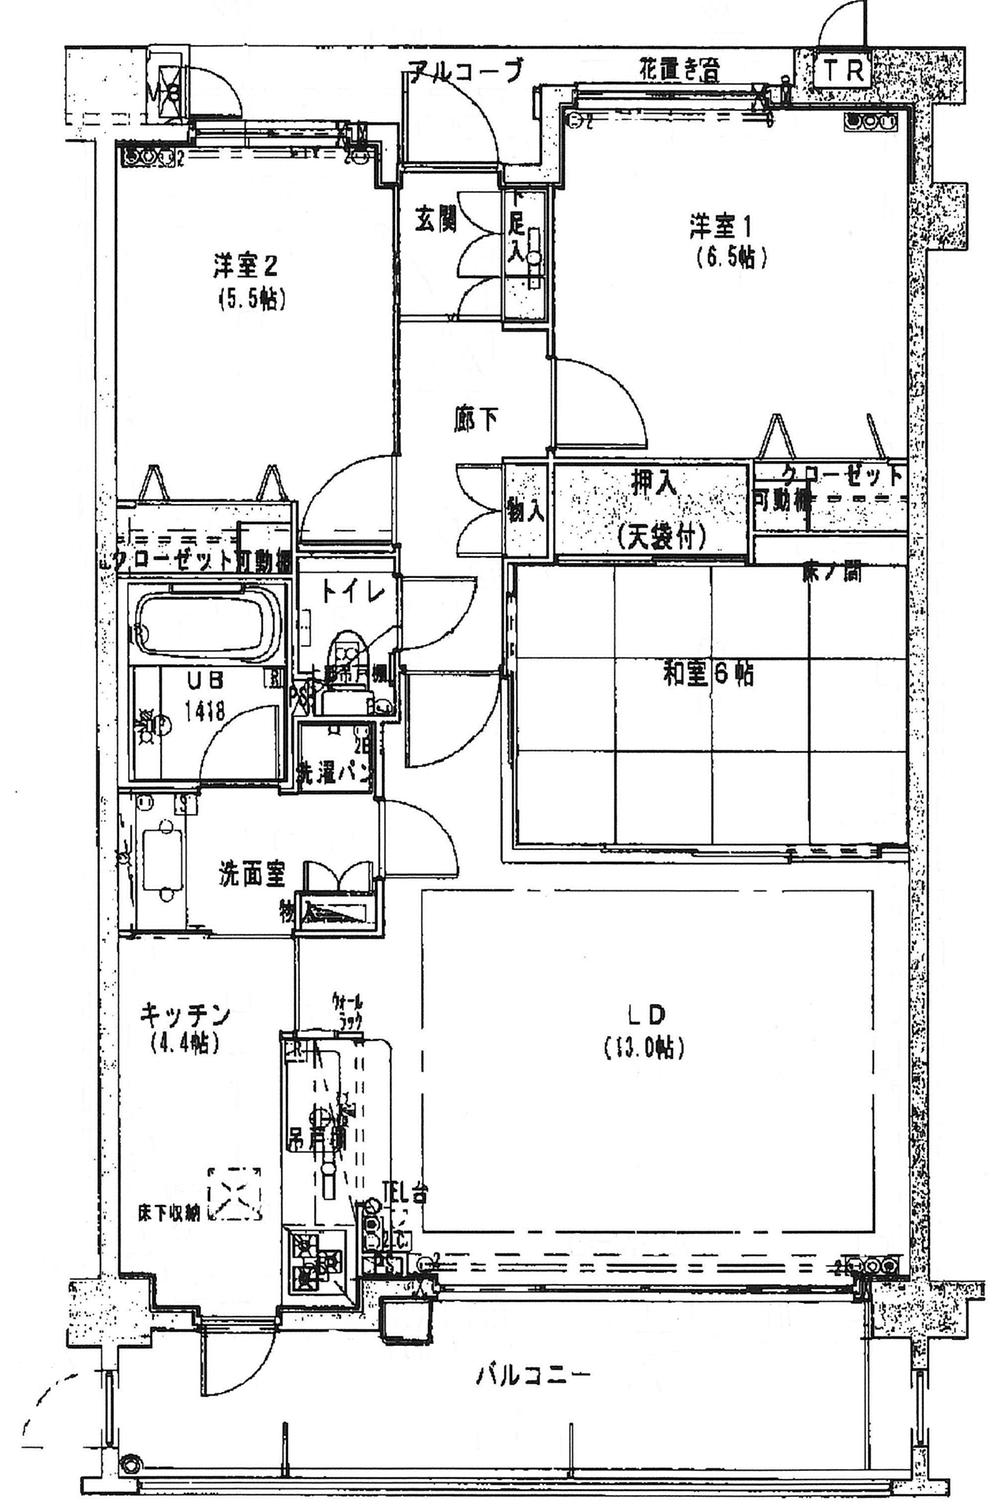 Floor plan. 3LDK, Price 32,500,000 yen, Occupied area 75.48 sq m , Balcony area 12.09 sq m yang per and good rooms well-ventilated.